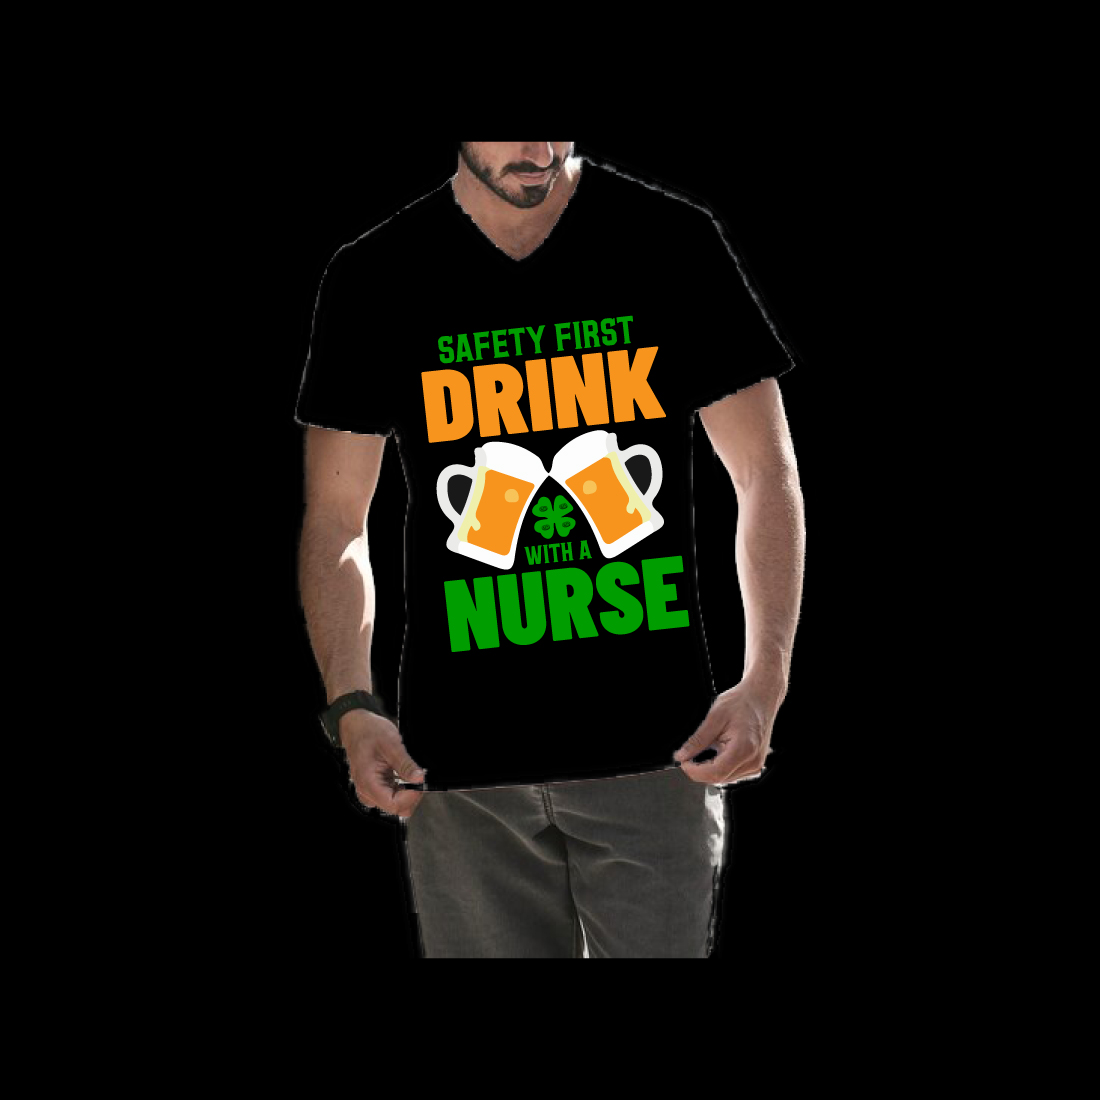 Man wearing a t - shirt that says safety first drink a nurse.